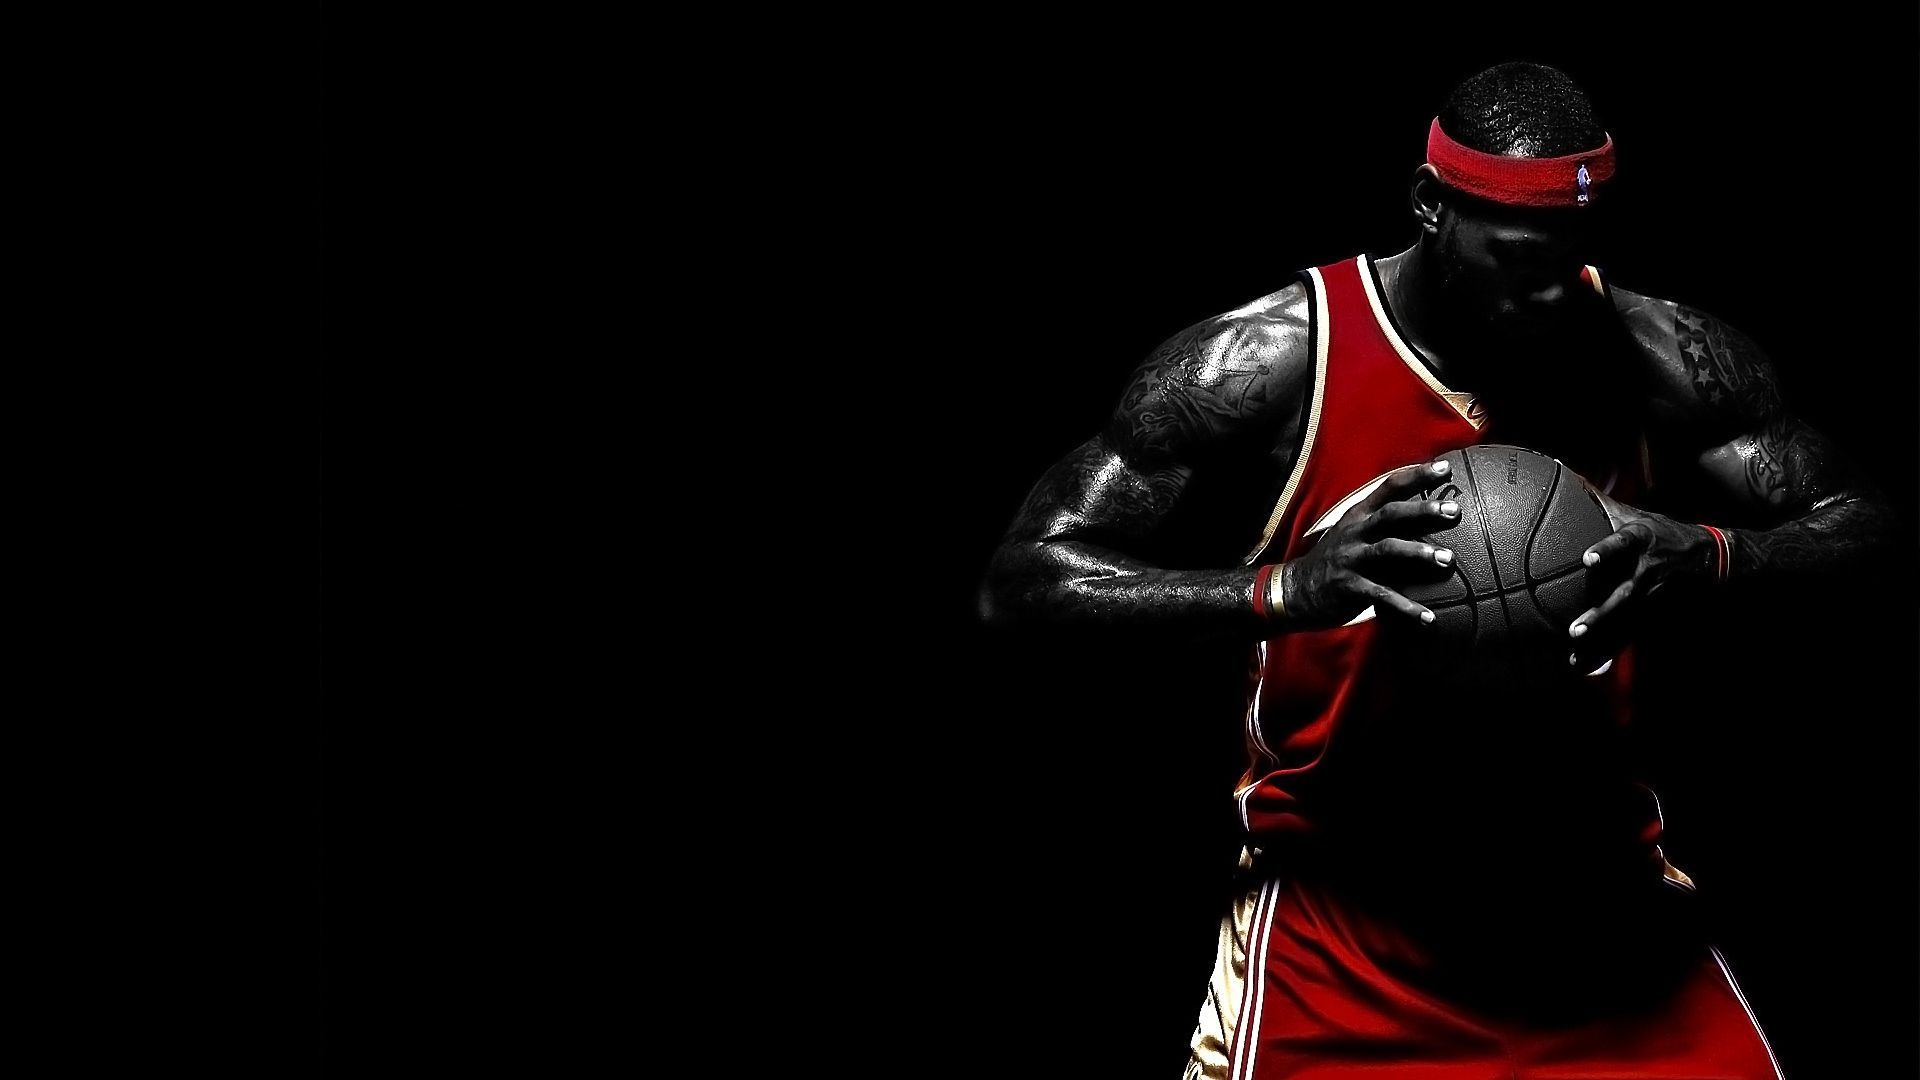 Cool Basketball Wallpapers Wallpapers